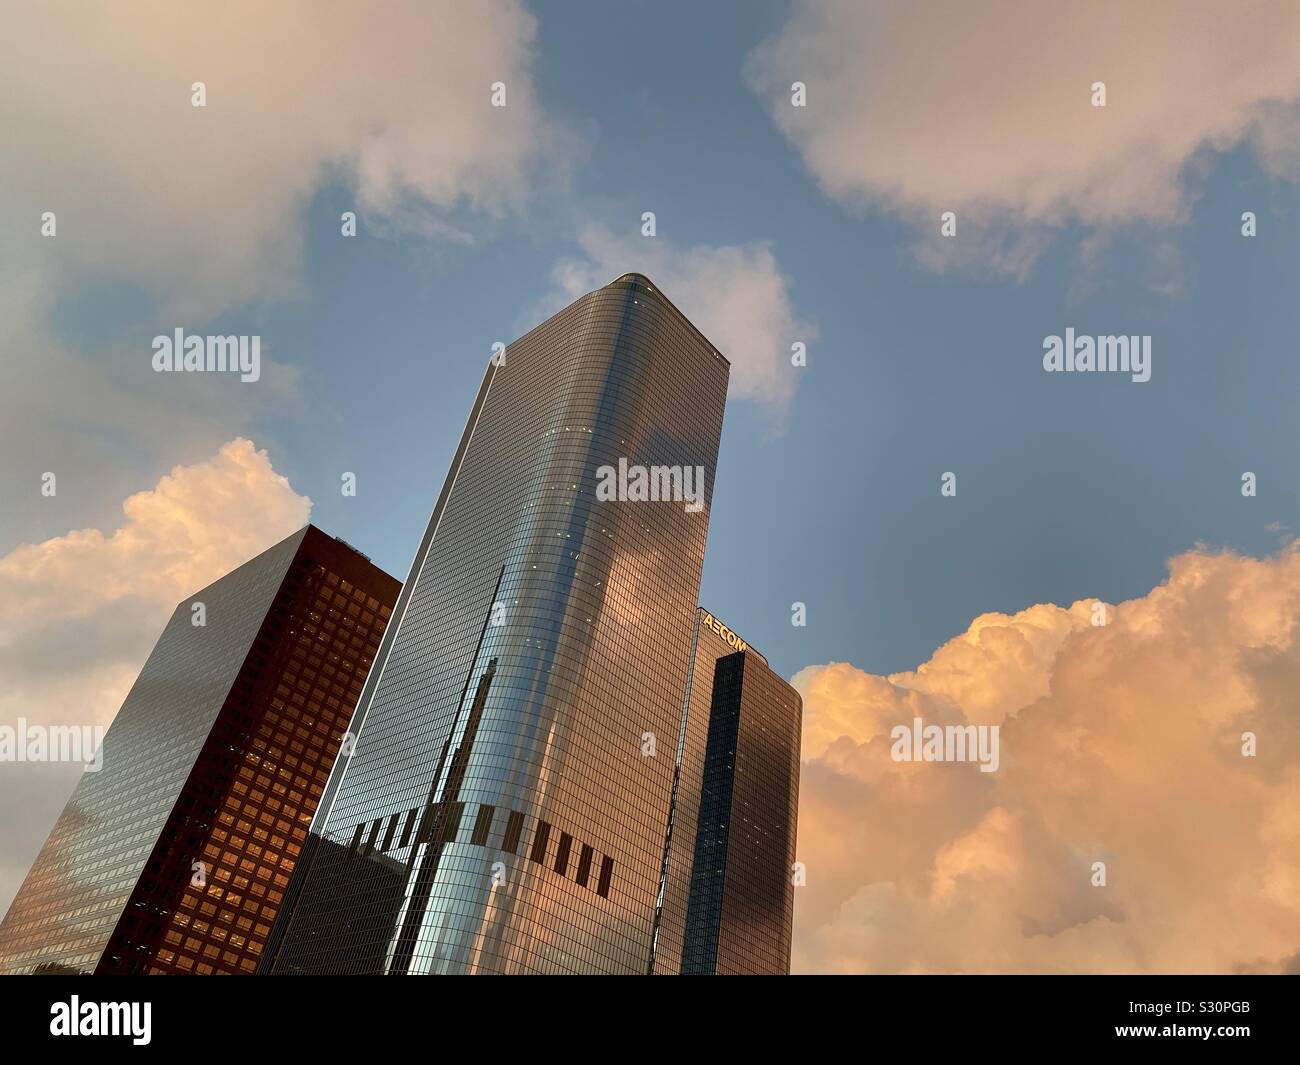 LOS ANGELES, CA, NOV 2019: looking up at skyscrapers in California Plaza at sunset, with copper orange clouds, in the Financial District of Downtown Stock Photo